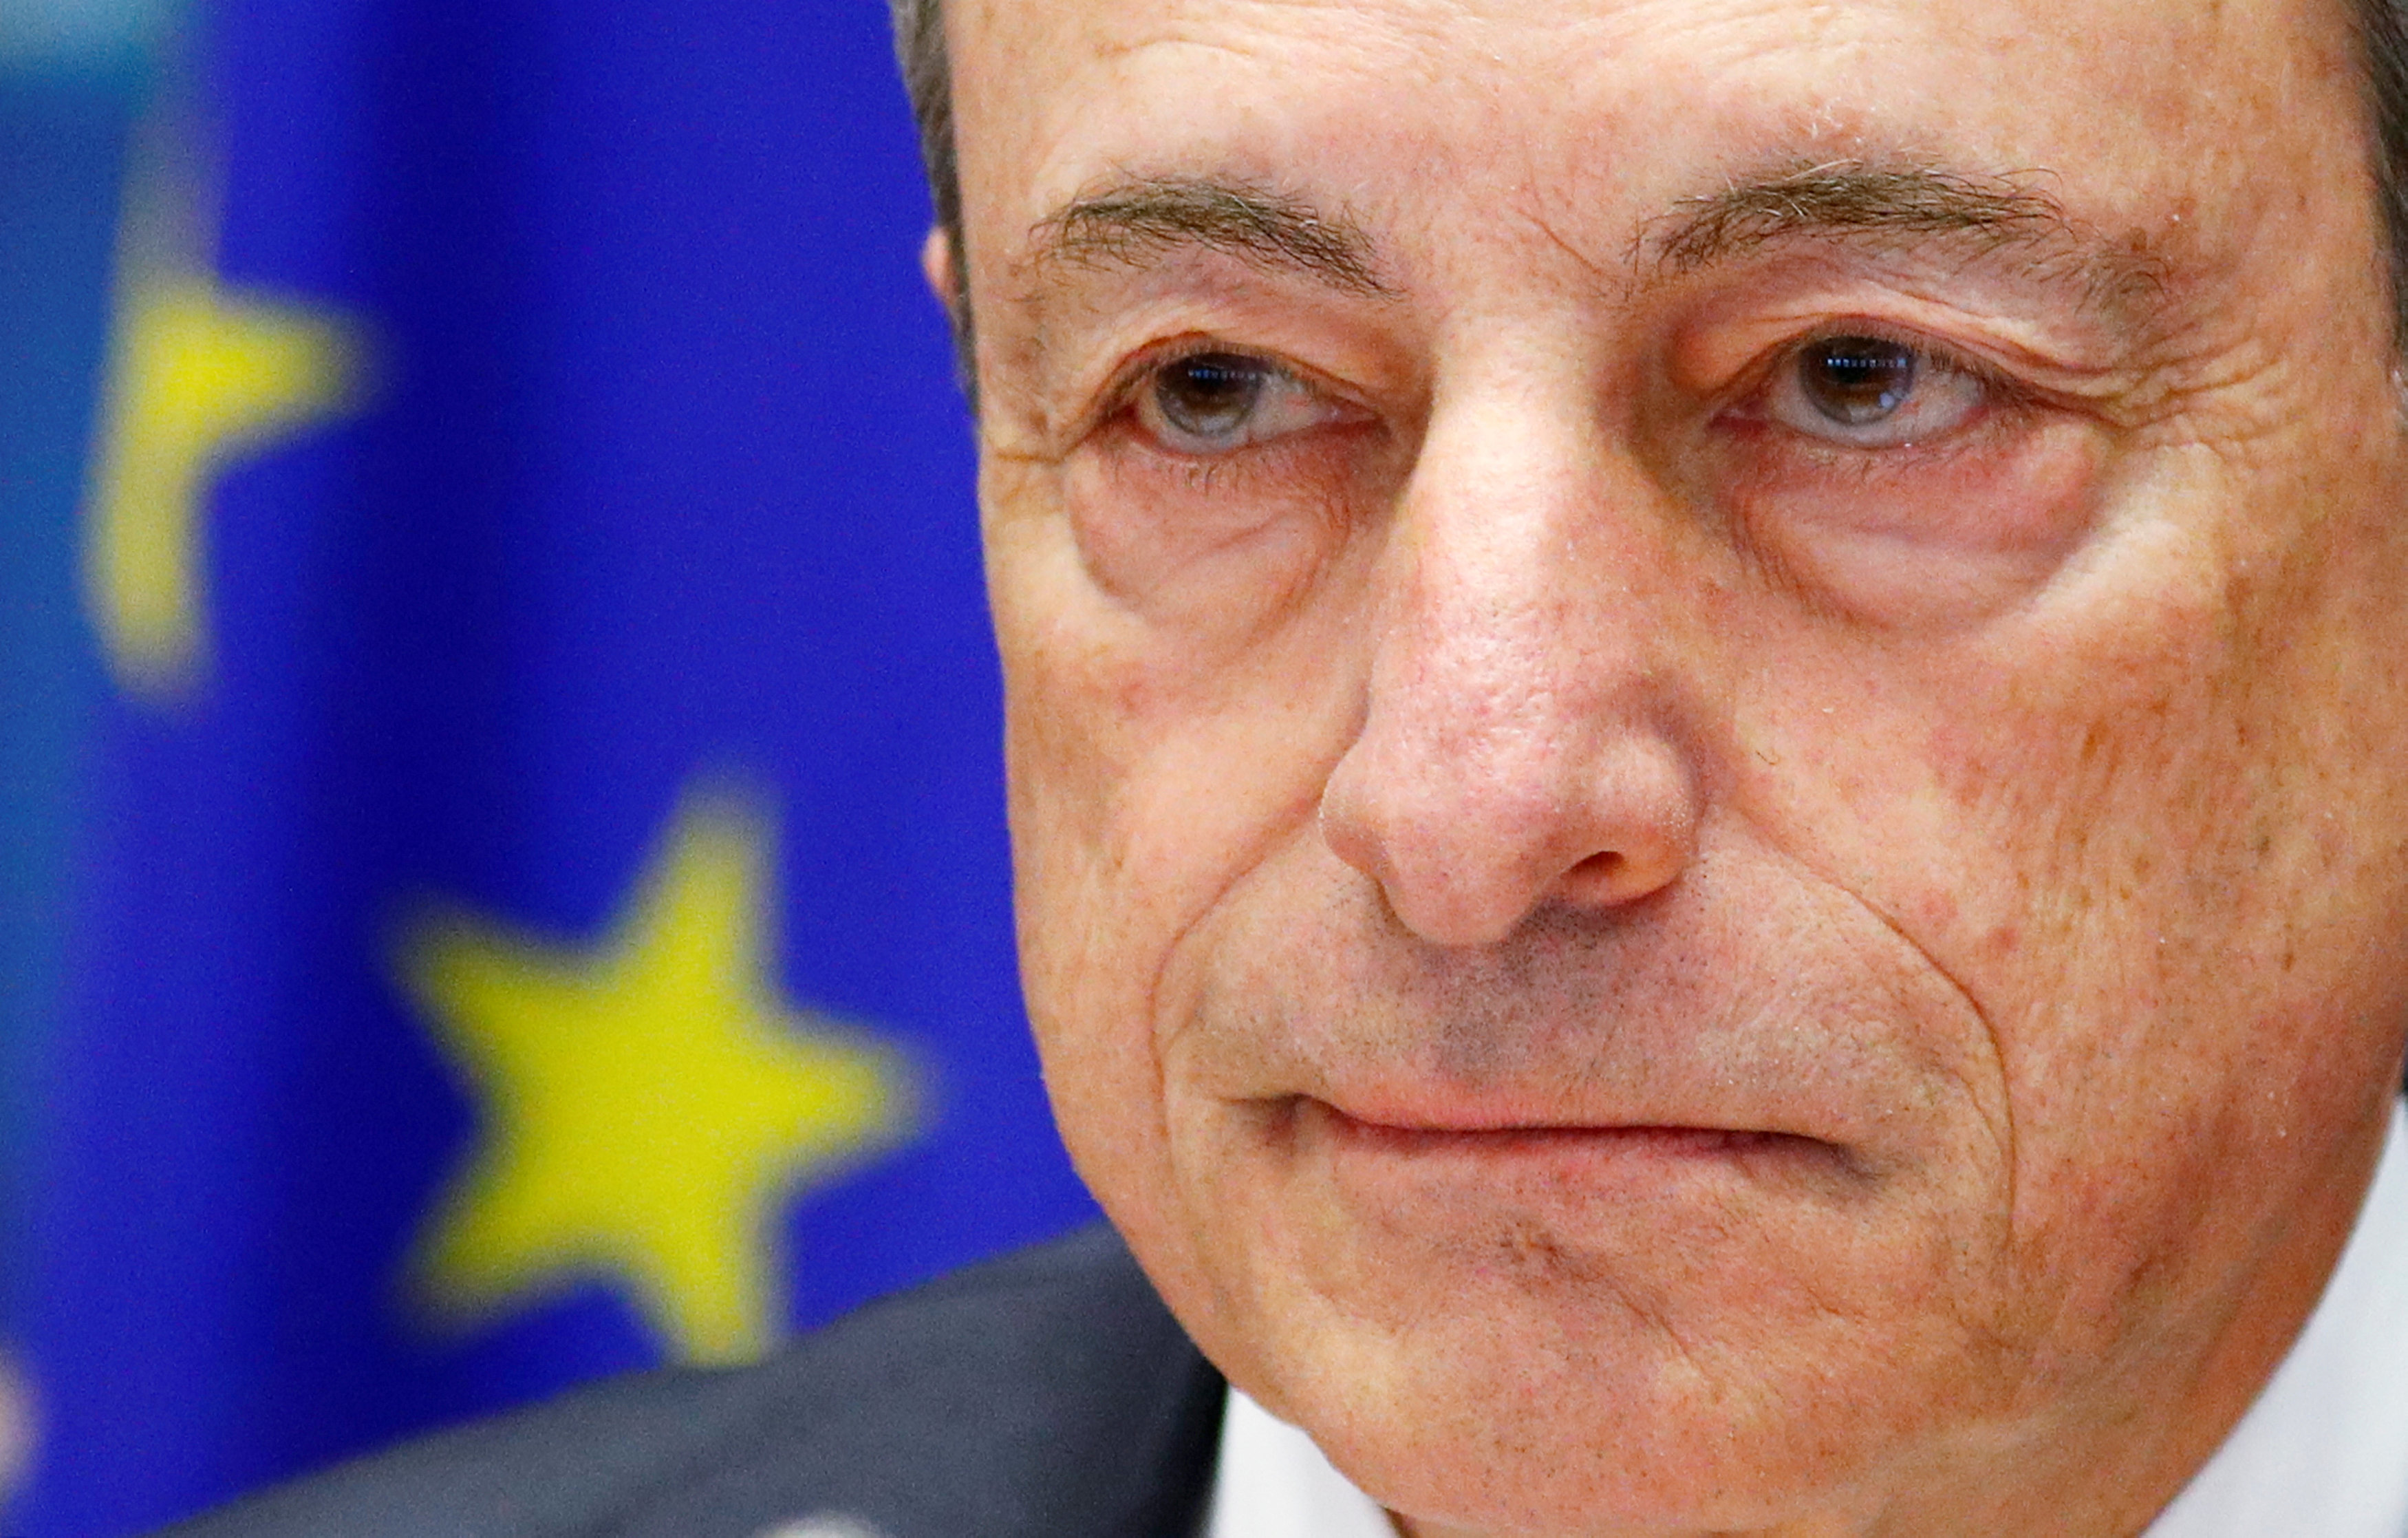 'Italy must 'calm down' and stop questioning the euro'